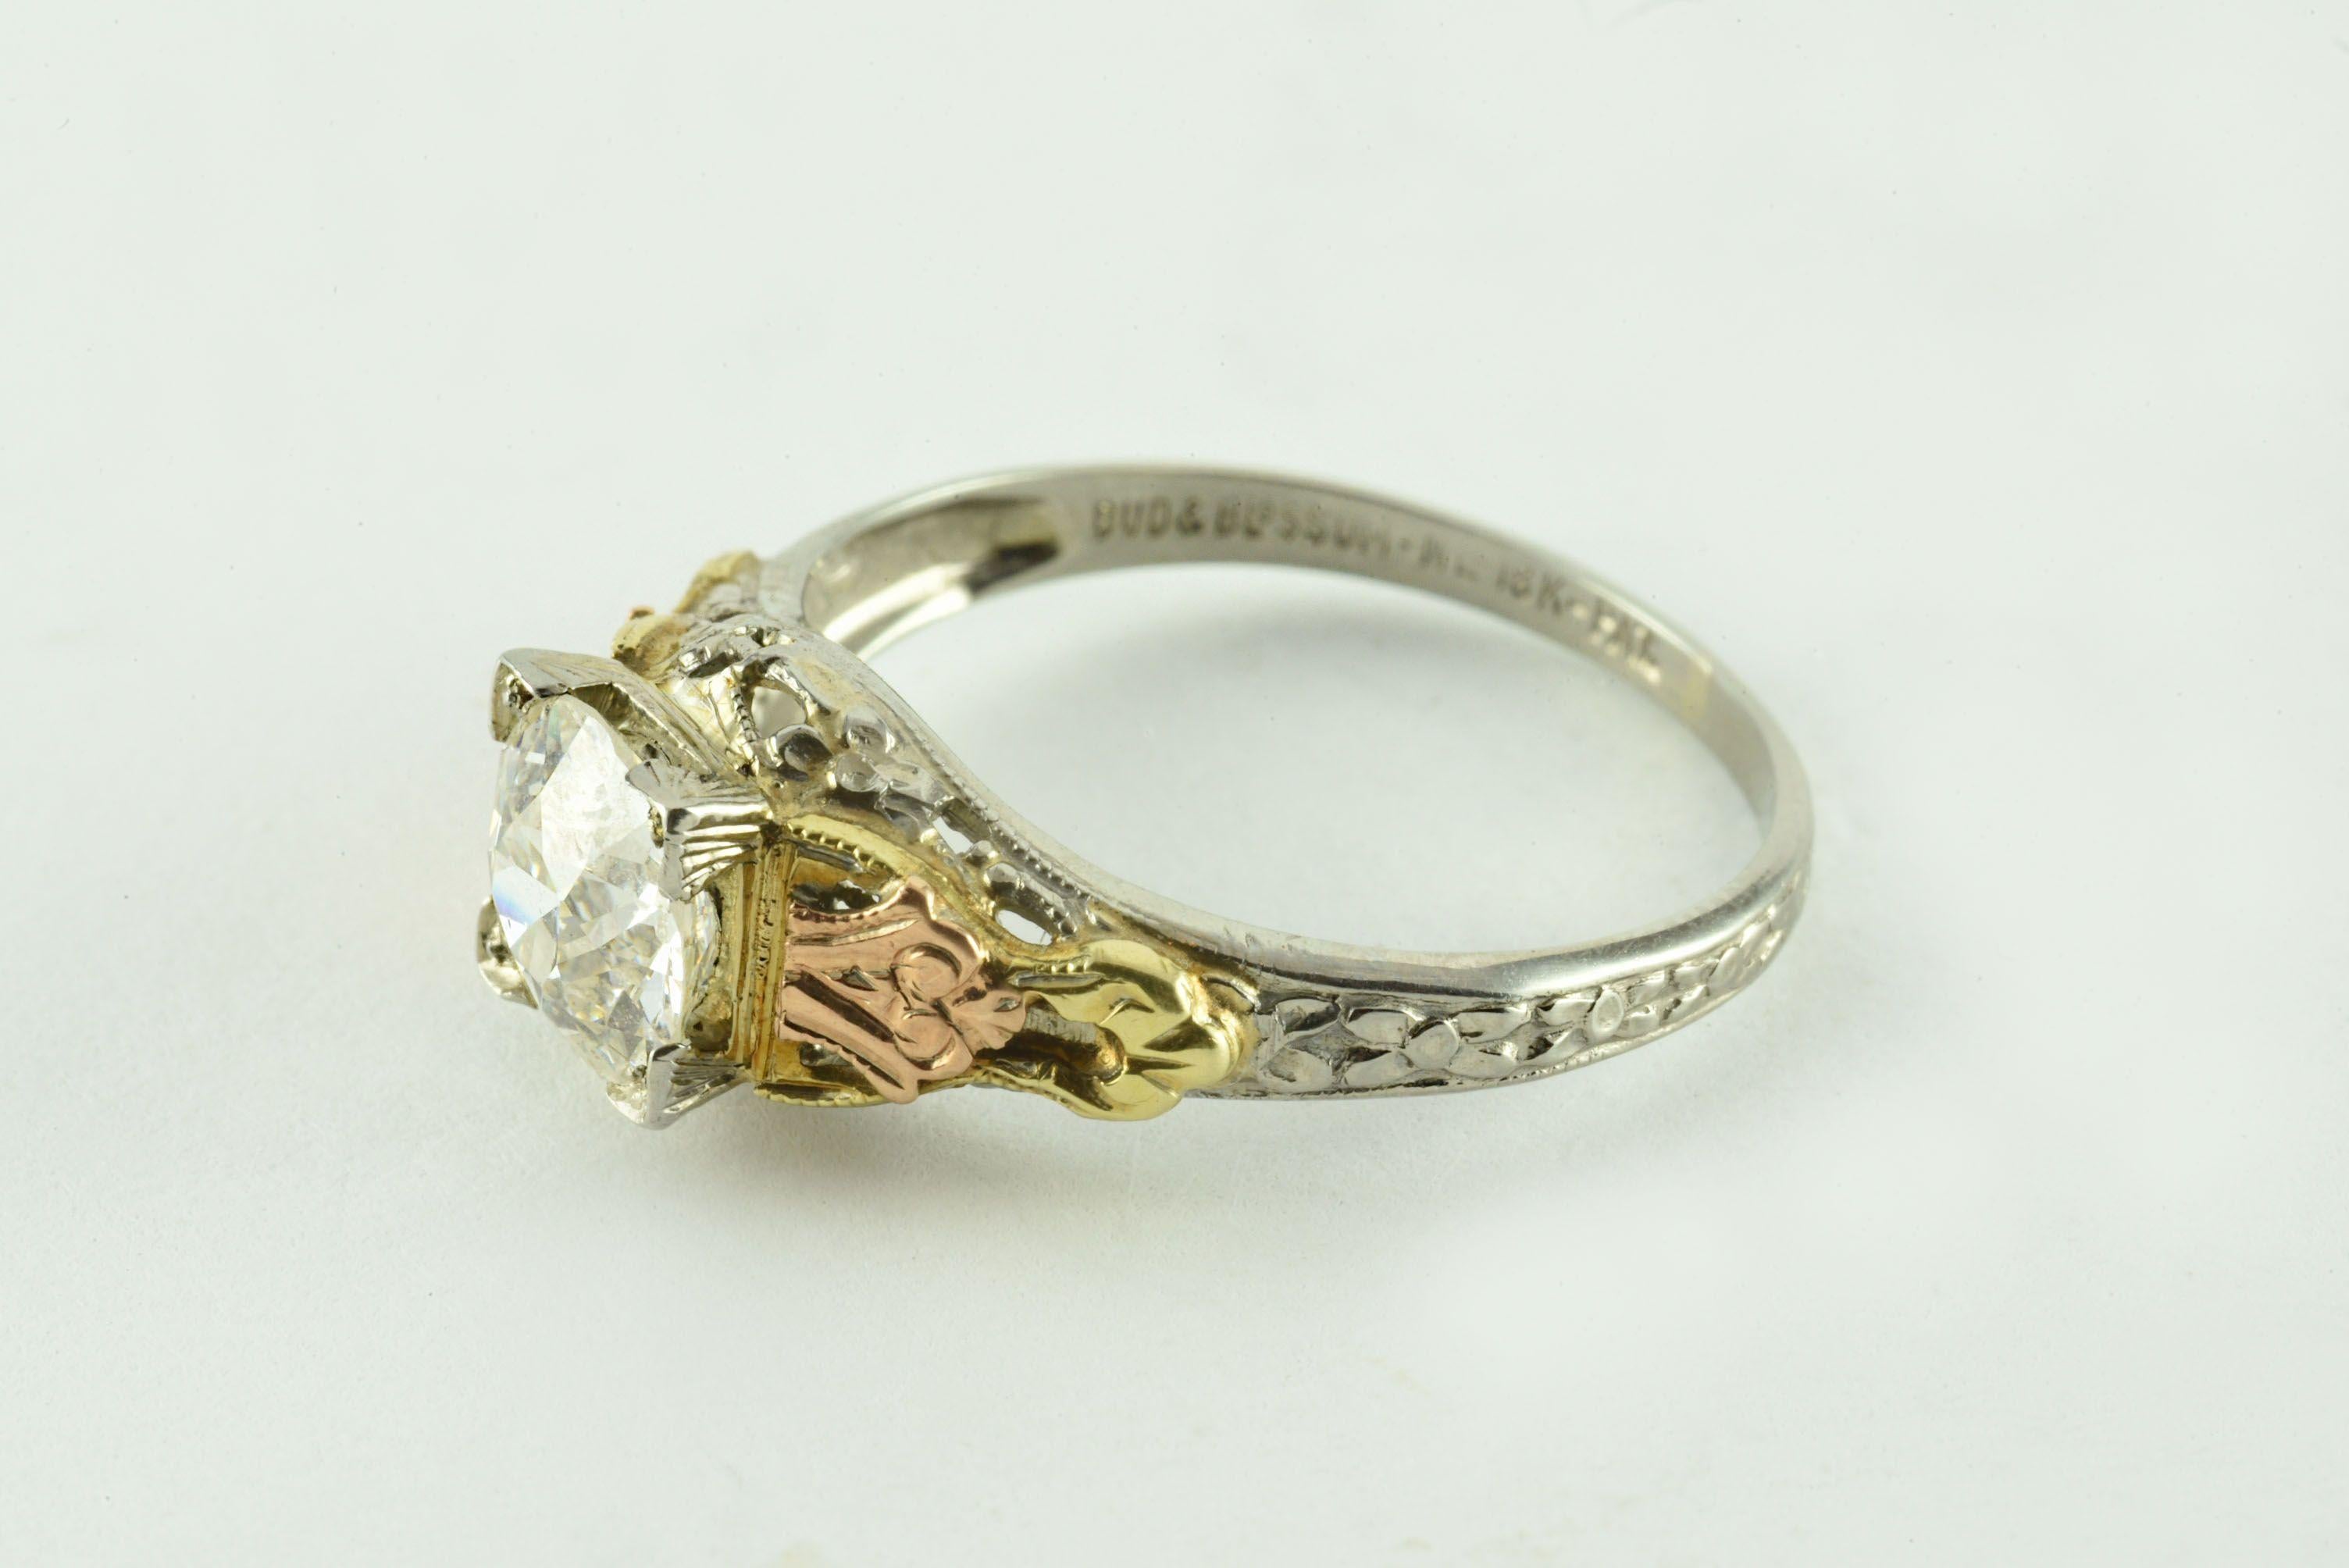 This antique stamped “Bud and Blossom” ring from the 1930s features an Old European cut diamond measuring 1.04 carats, J color, SI1 clarity and set in platinum with 18kt yellow gold and 18kt rose gold sides. 
